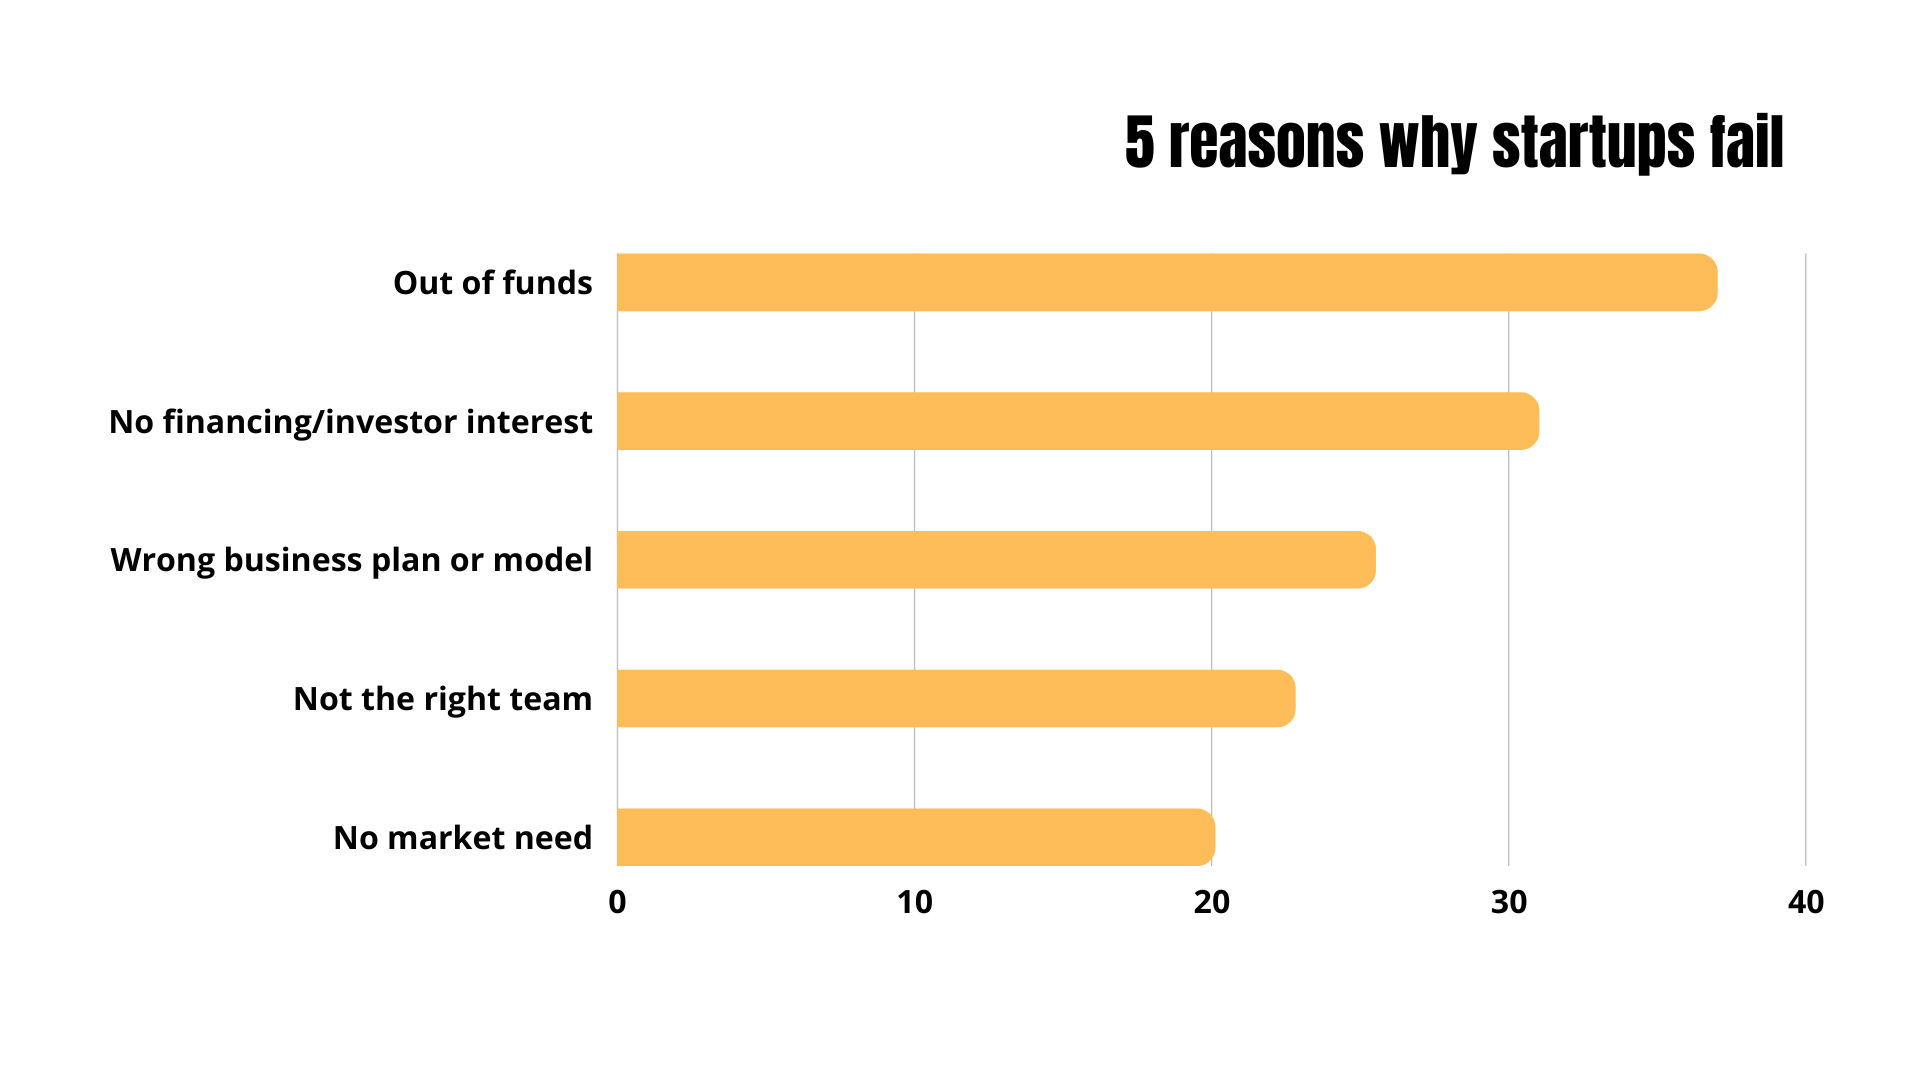 Why Startups Fail Top 5 Reasons and How to Avoid Them - Startup Insights Hub